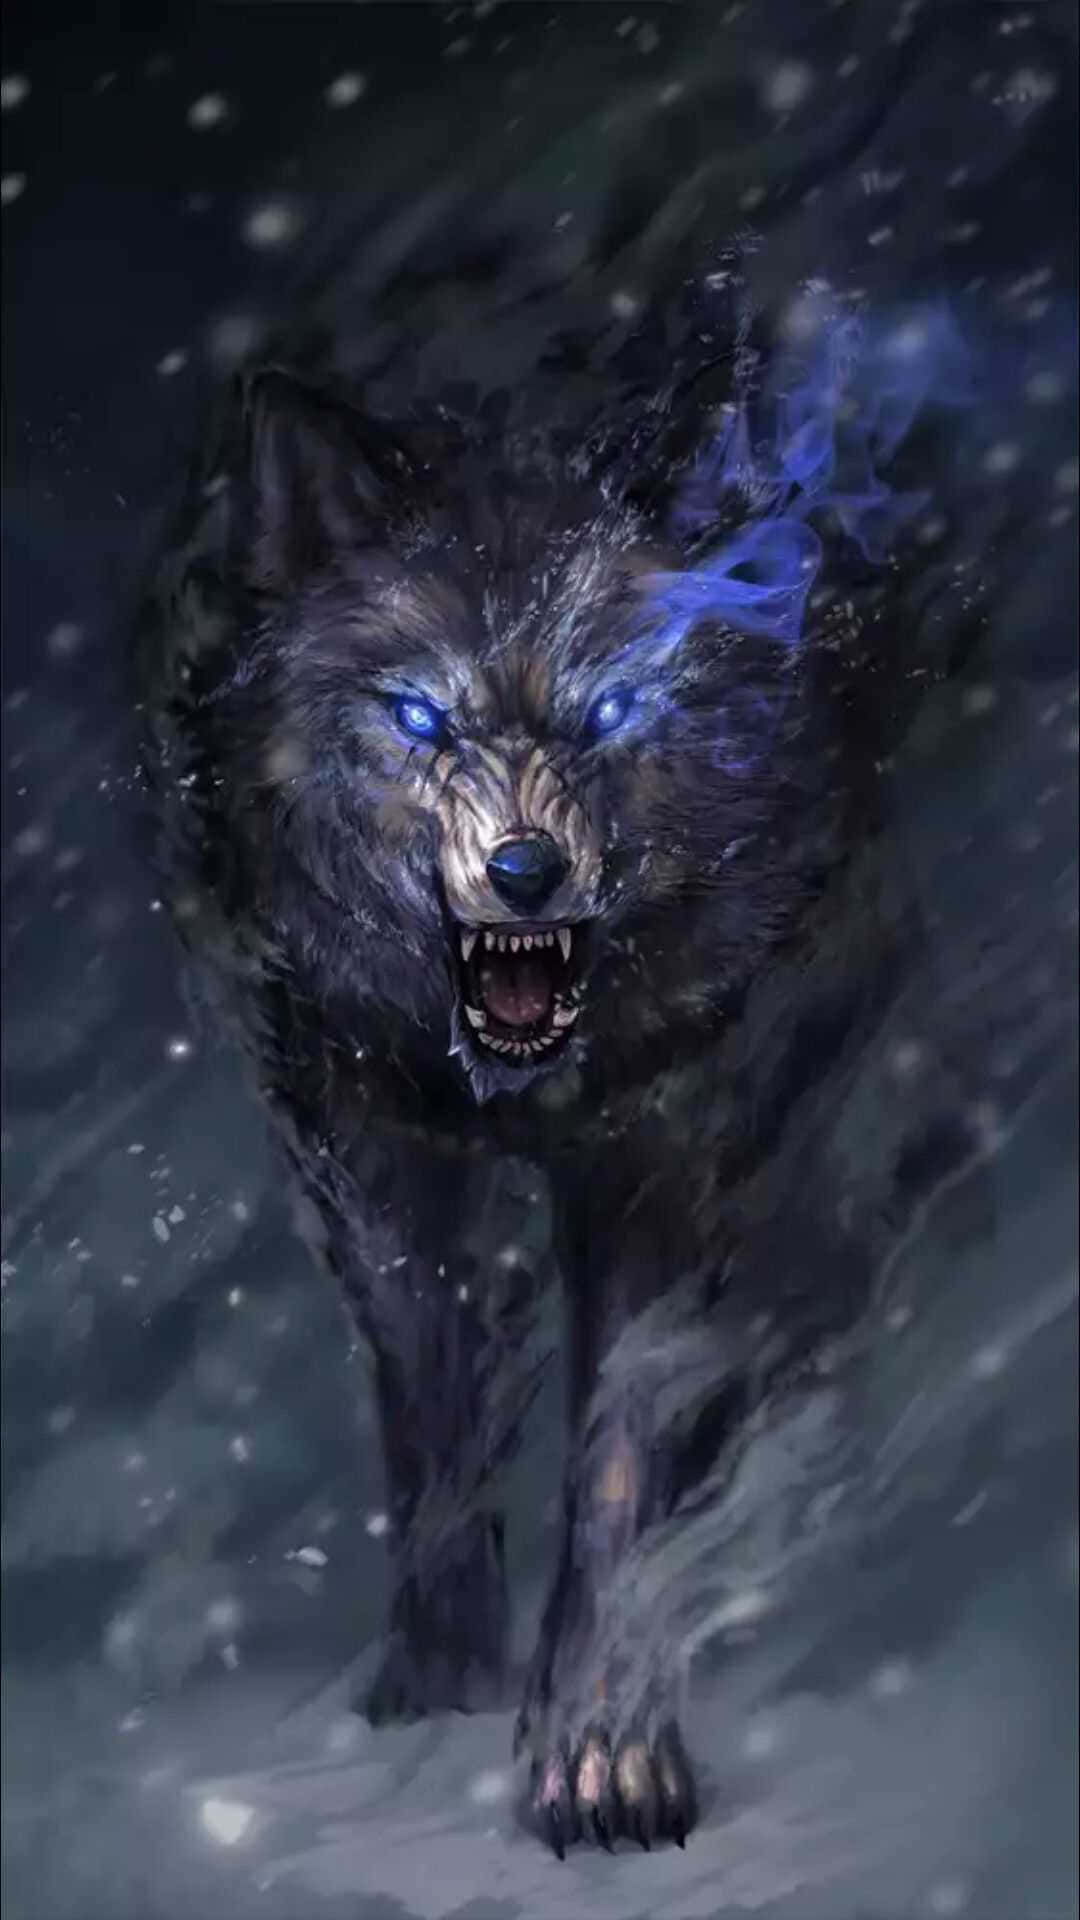 Caption: Ferocious Angry Wolf in Action Wallpaper